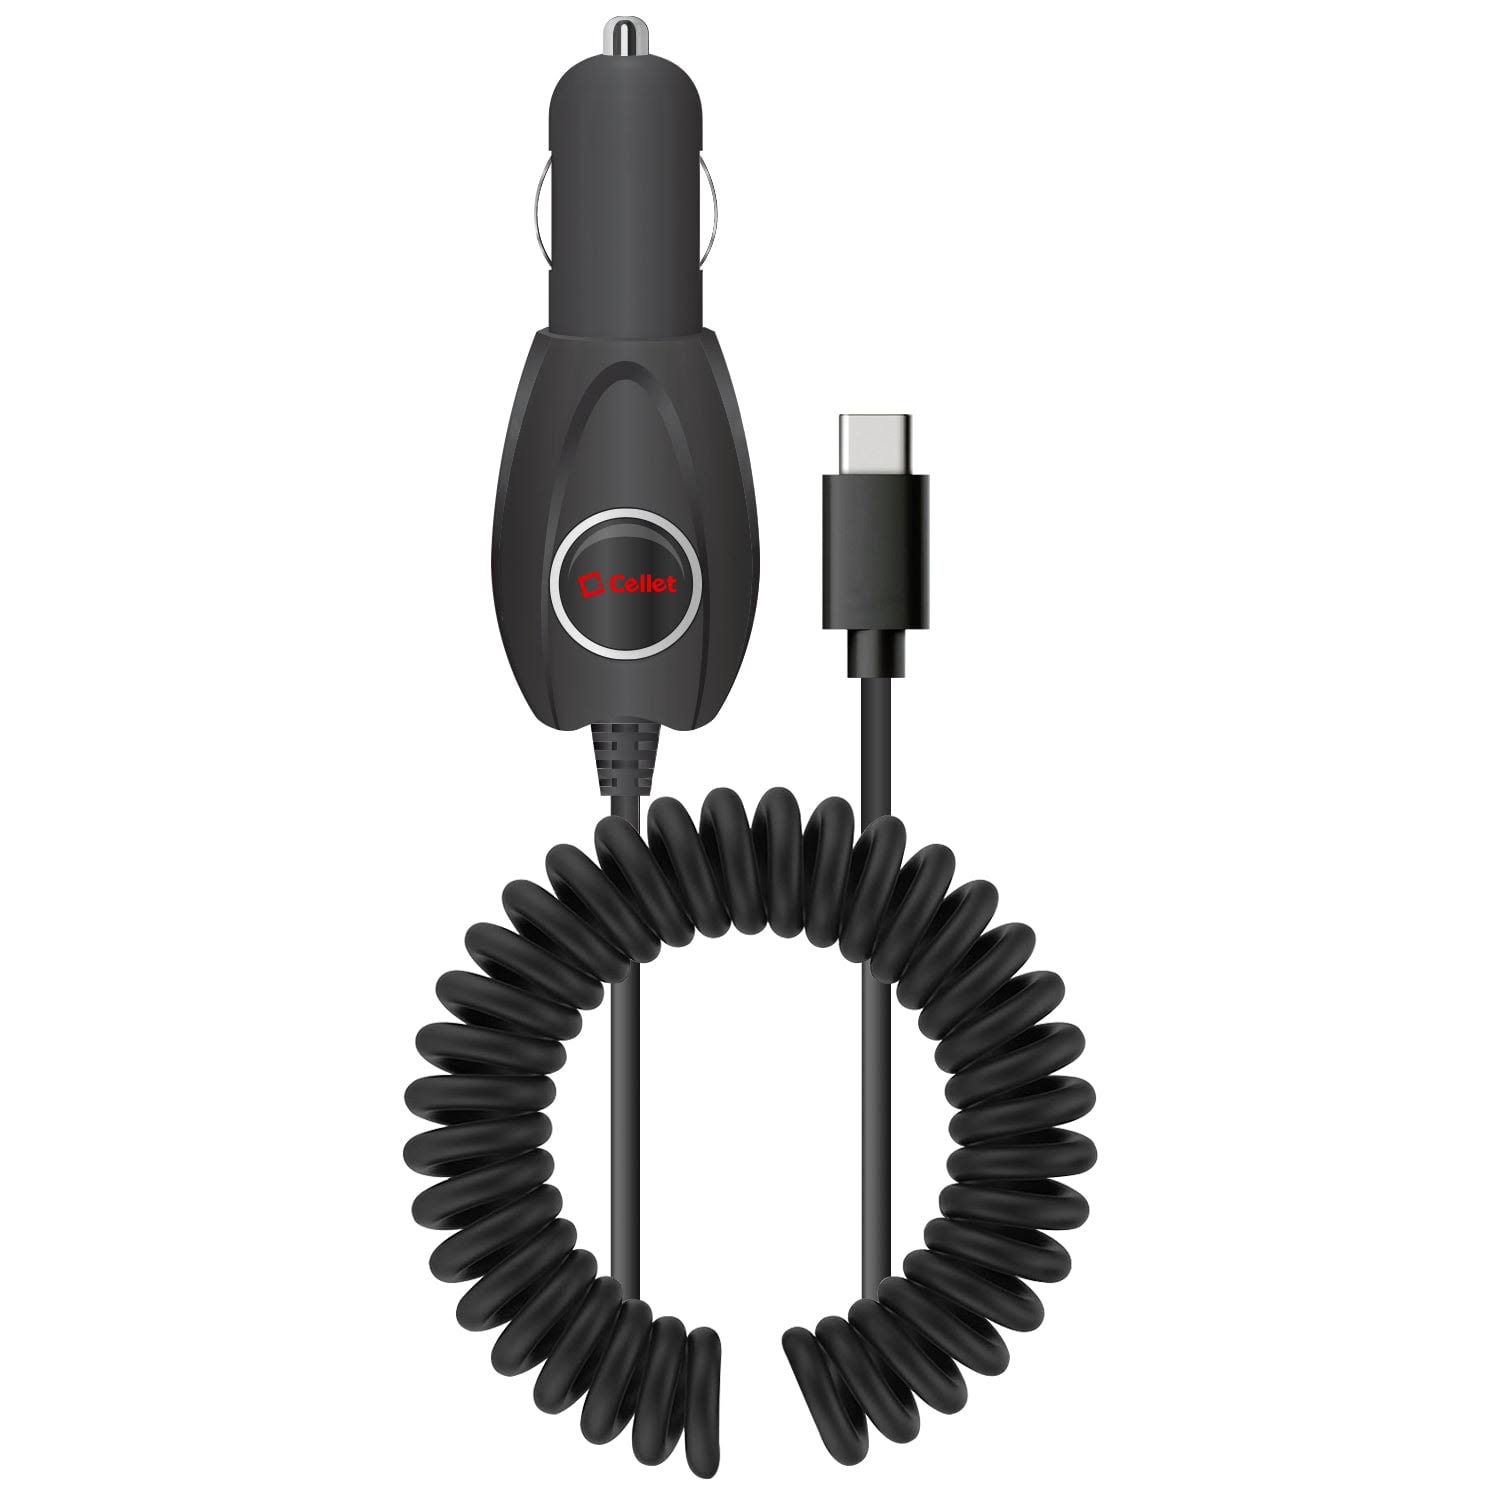 High Powered 15 Watt (3 Amp) Type-C Coiled Cable (5.7 ft.) Car Charger by Cellet - Black